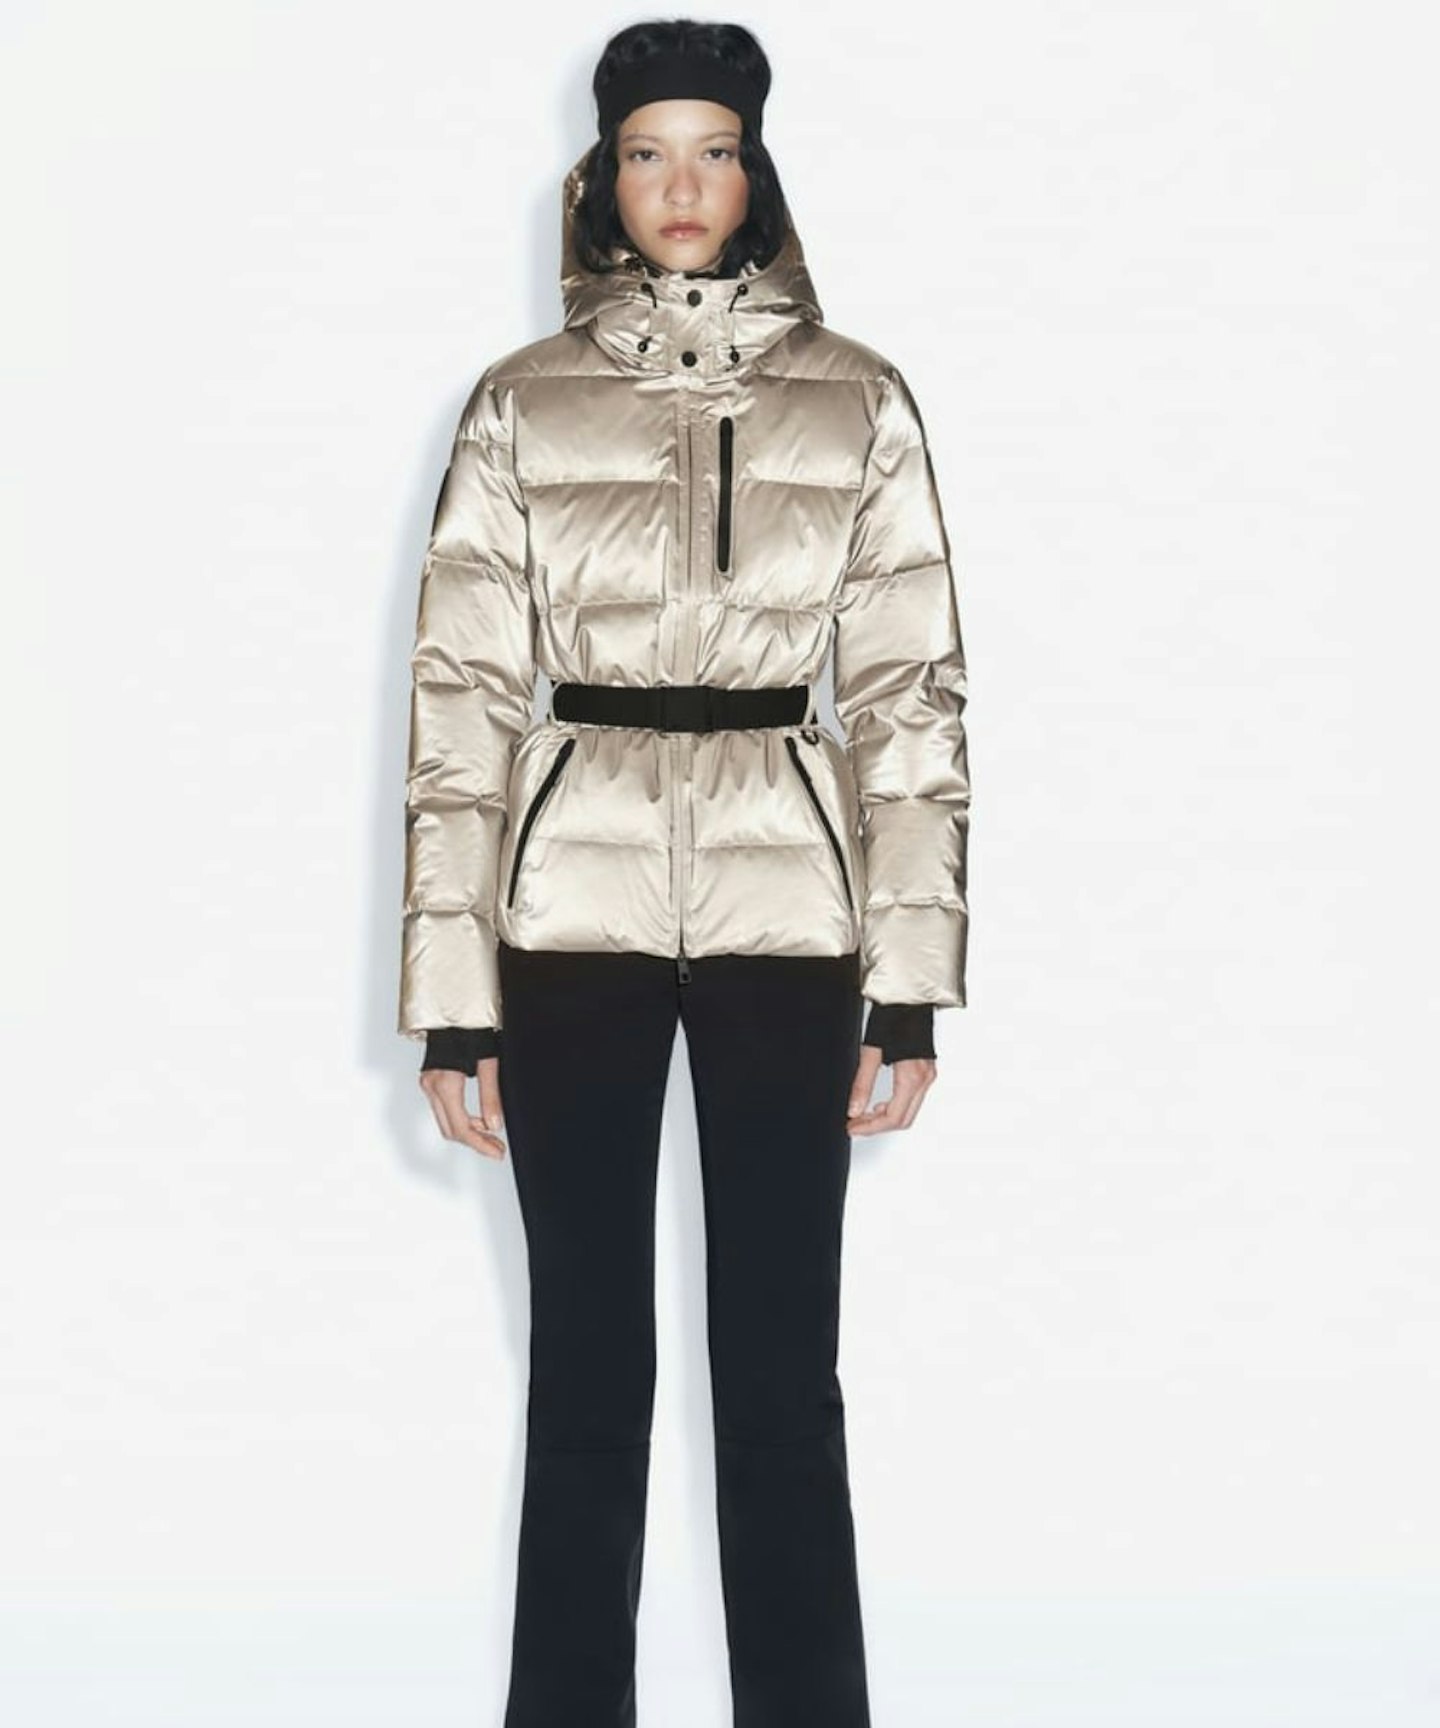 Zara's Latest Skiwear Collection Has Just Landed